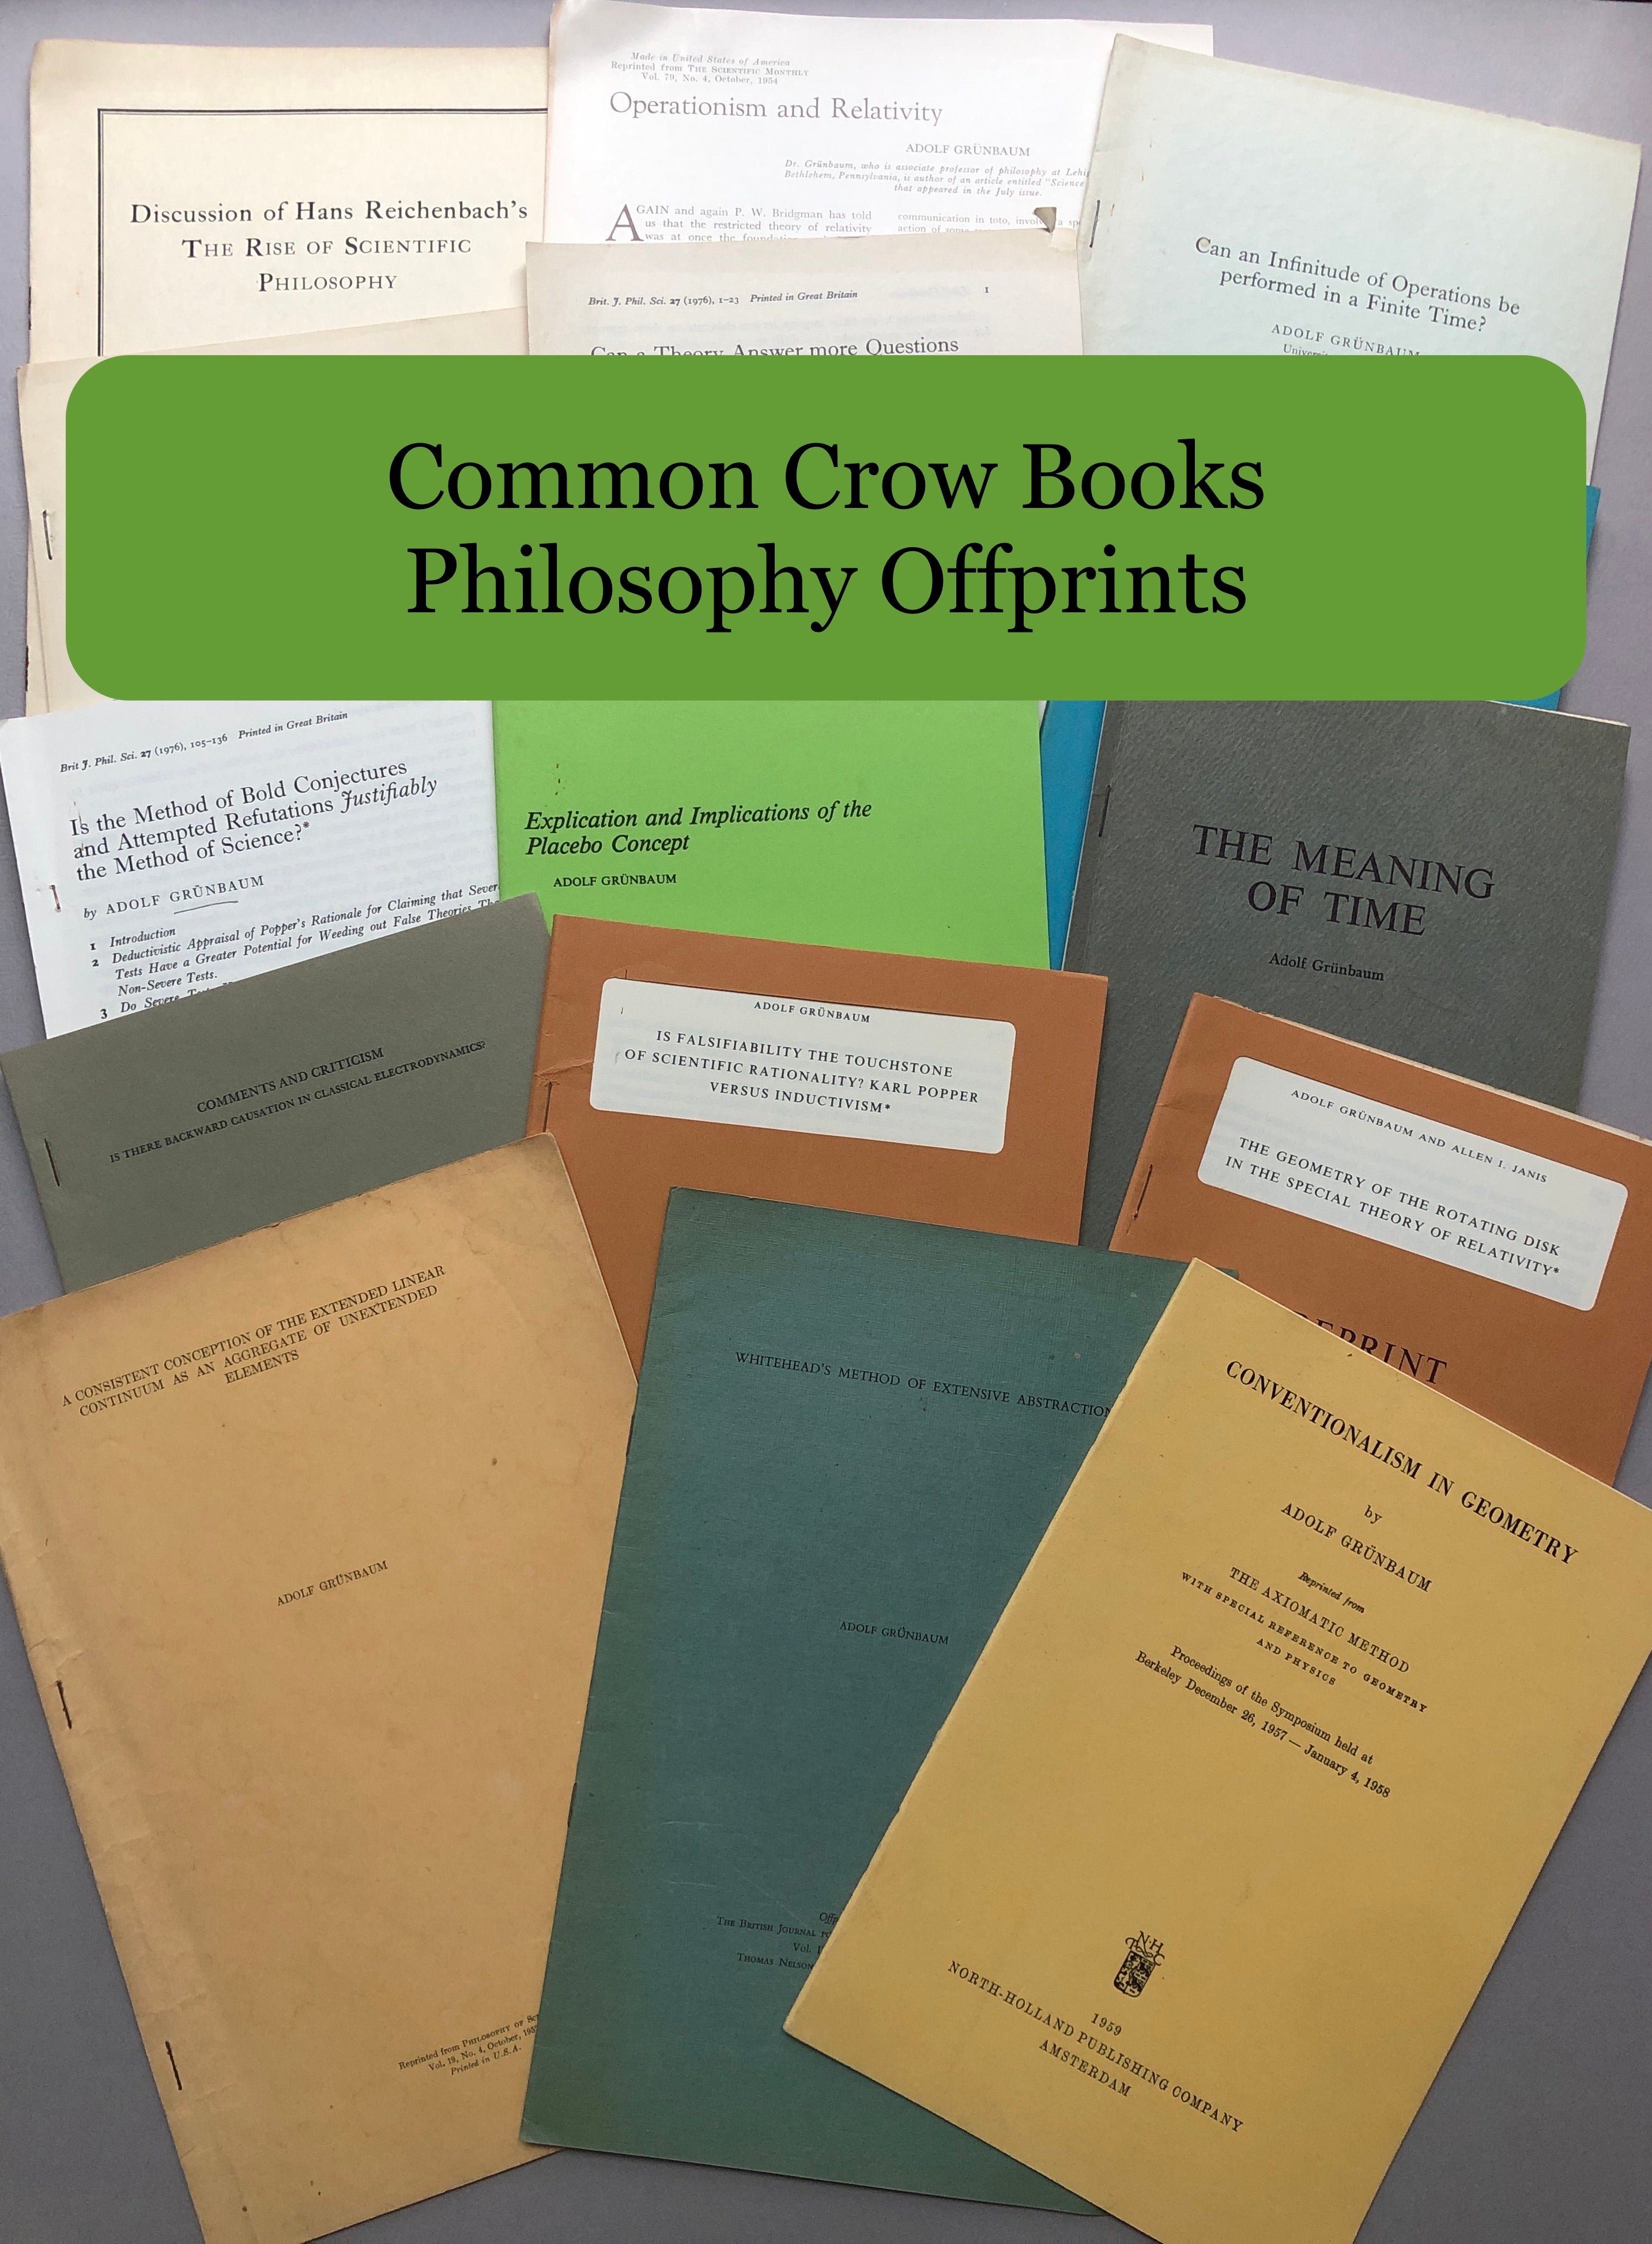 Philosophy first editions & offprints